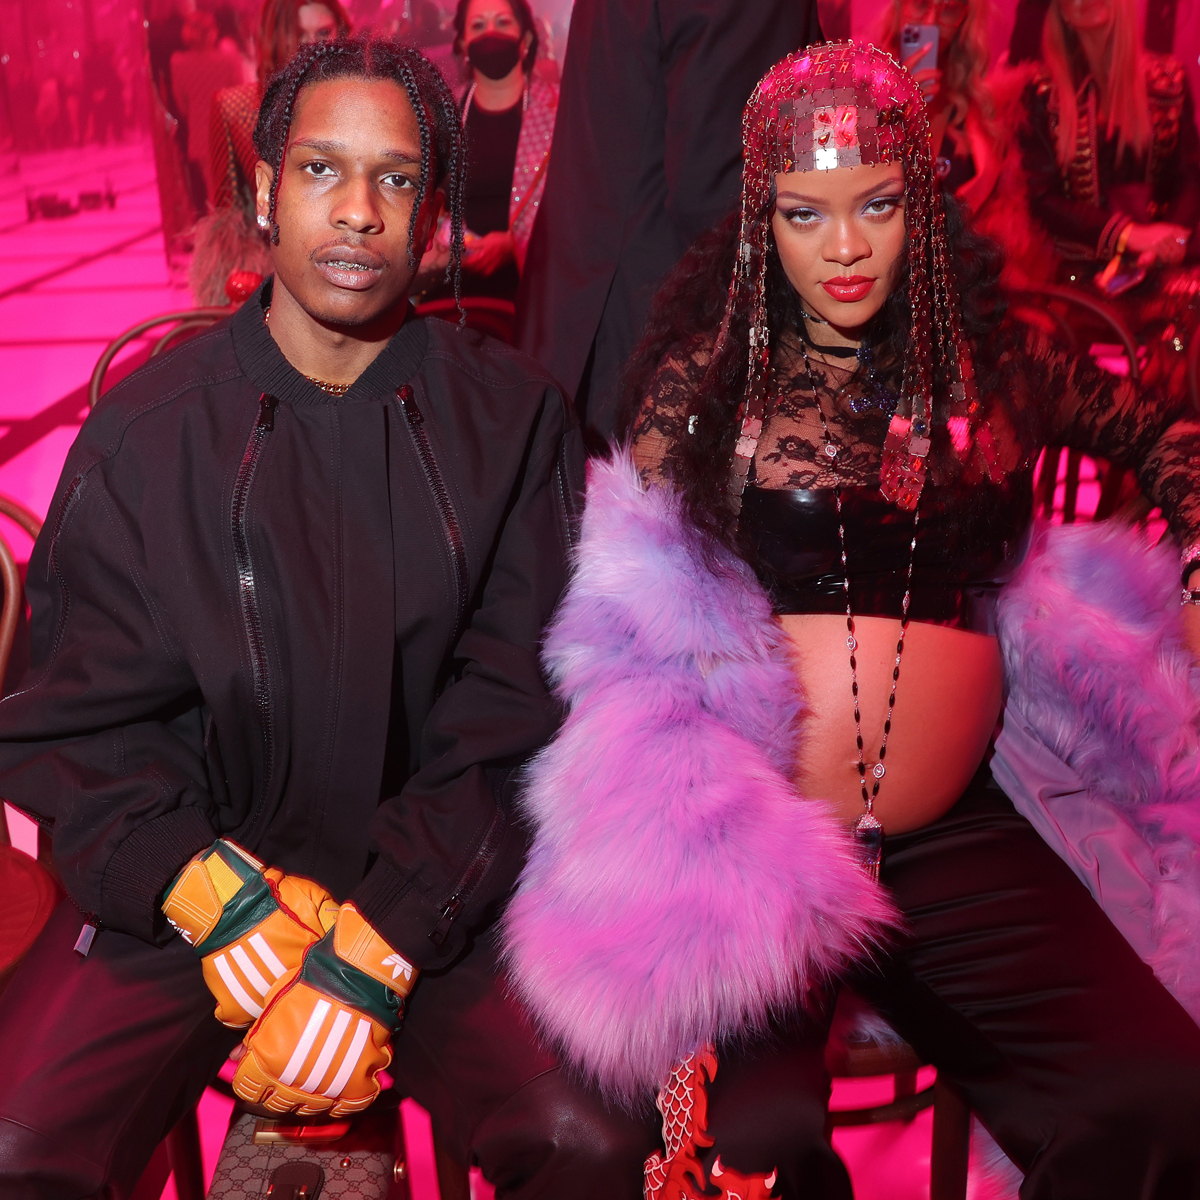 ASAP Rocky Fashion and Outfits - A$AP Rocky Favorite Designers